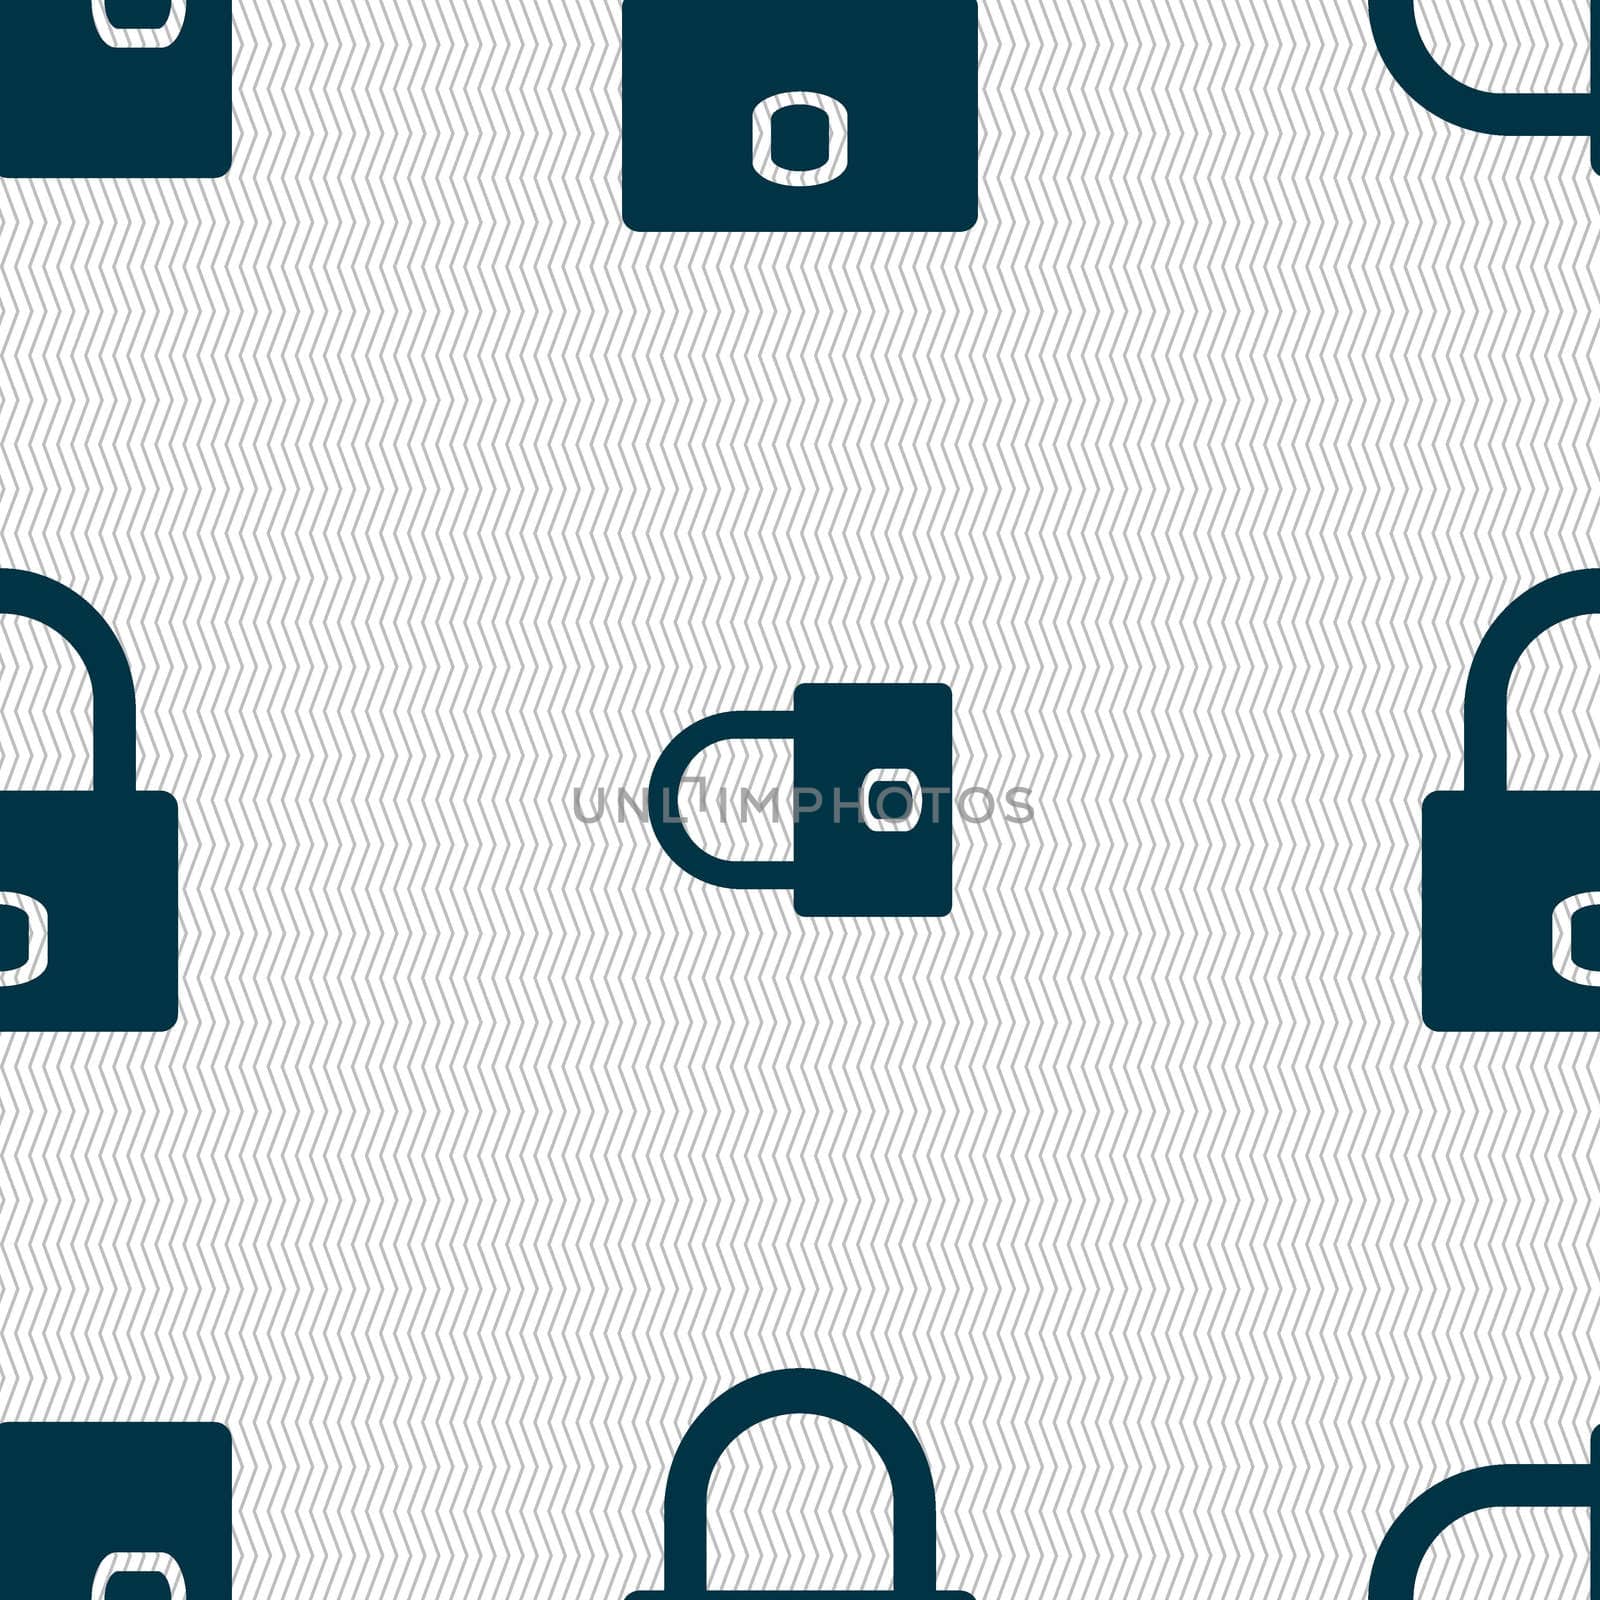 Lock sign icon. Locker symbol. Seamless abstract background with geometric shapes. illustration